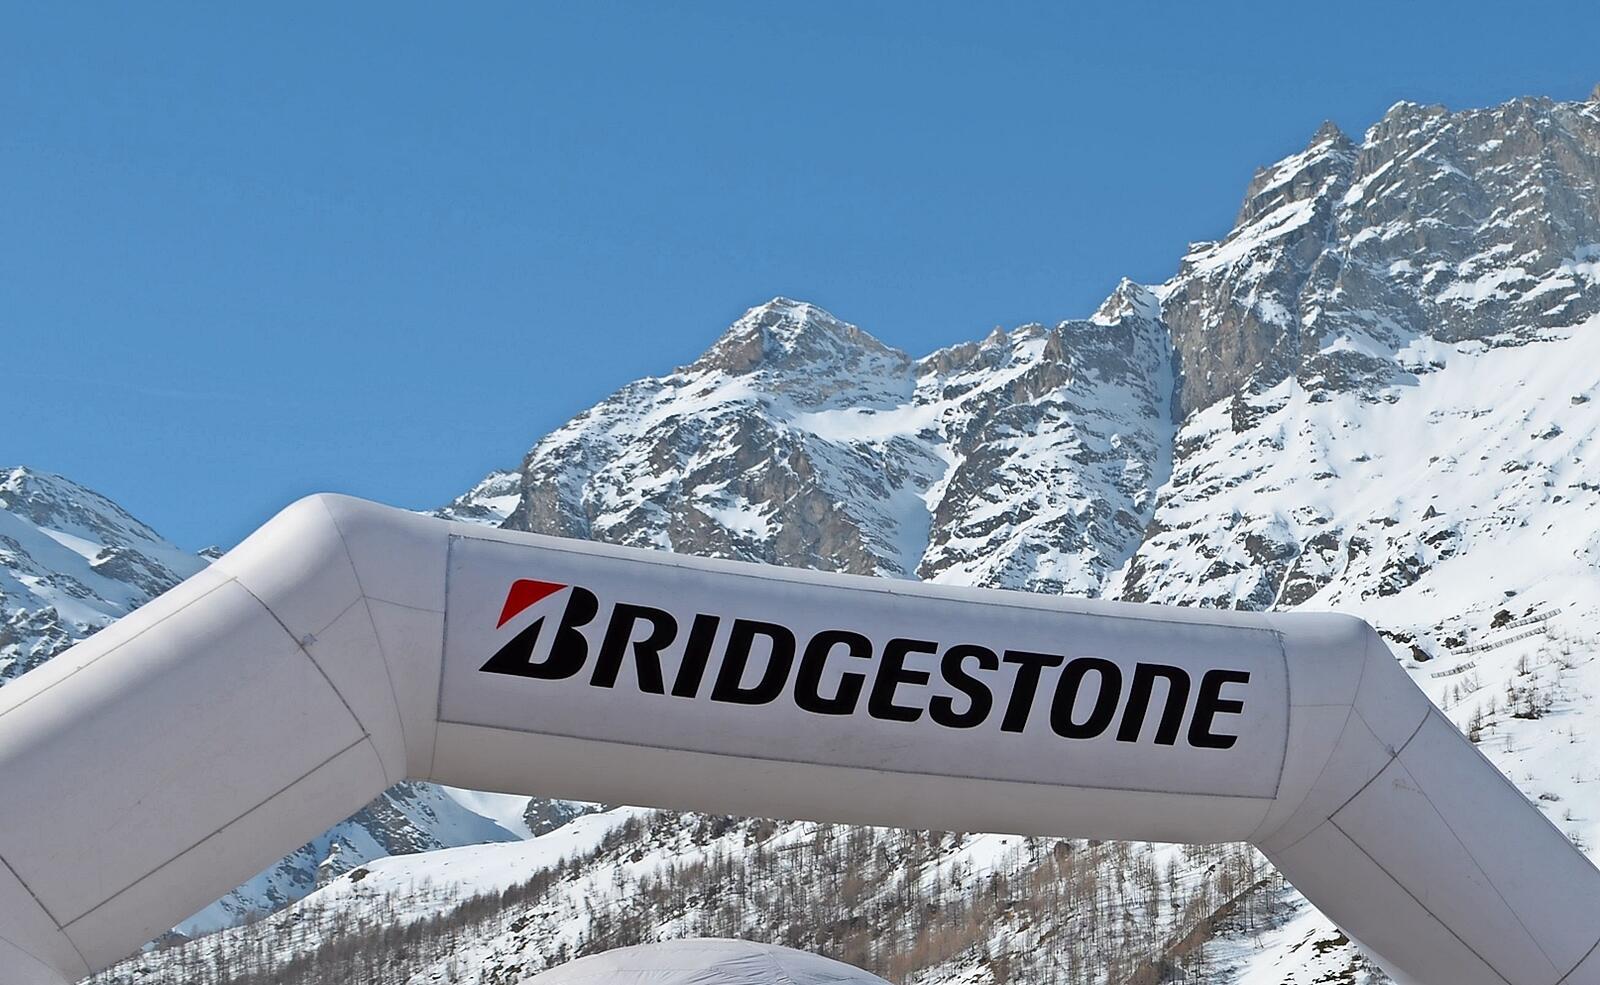 Bridgestone has defined its vision as “company for sustainable solutions” creating a societal added value by 2050.